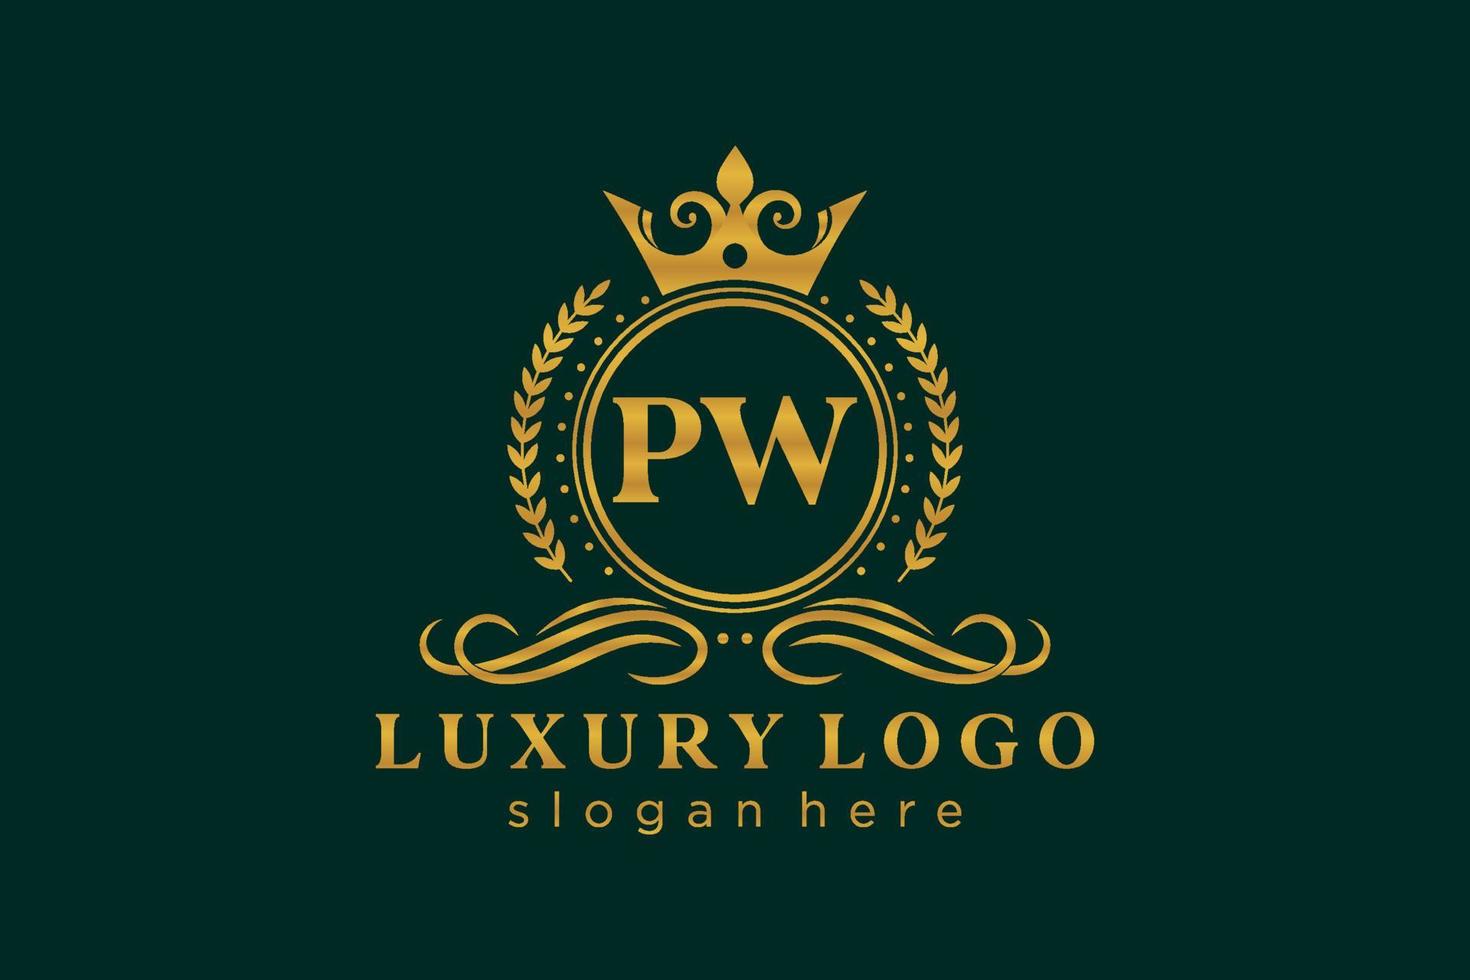 Initial PW Letter Royal Luxury Logo template in vector art for Restaurant, Royalty, Boutique, Cafe, Hotel, Heraldic, Jewelry, Fashion and other vector illustration.